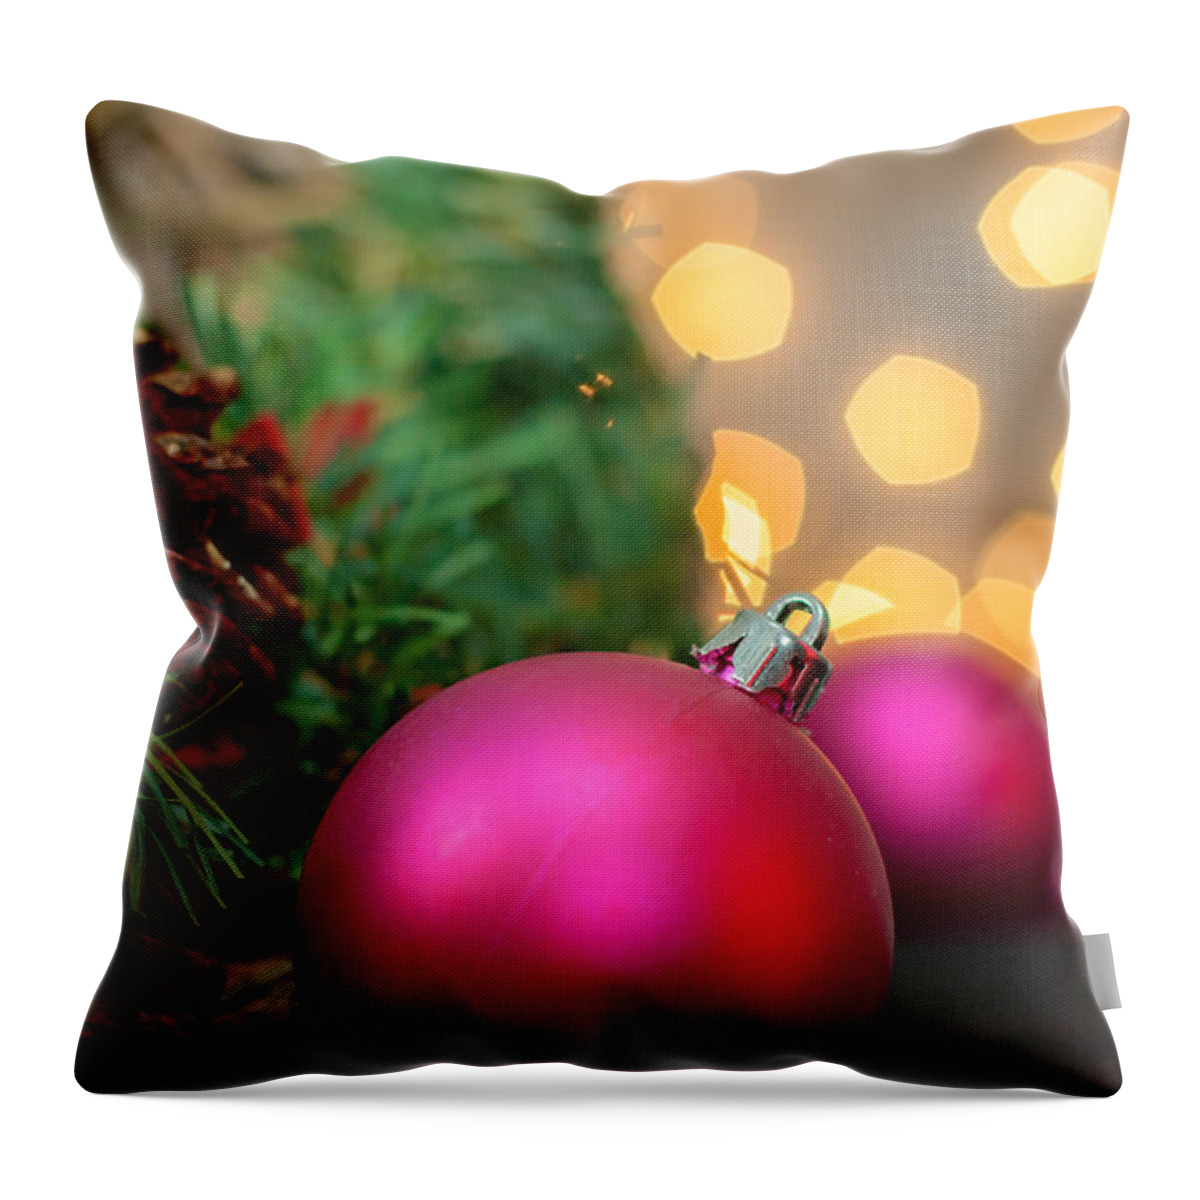 Christmas Throw Pillow featuring the photograph Ornaments And Wreath by Eugene Campbell